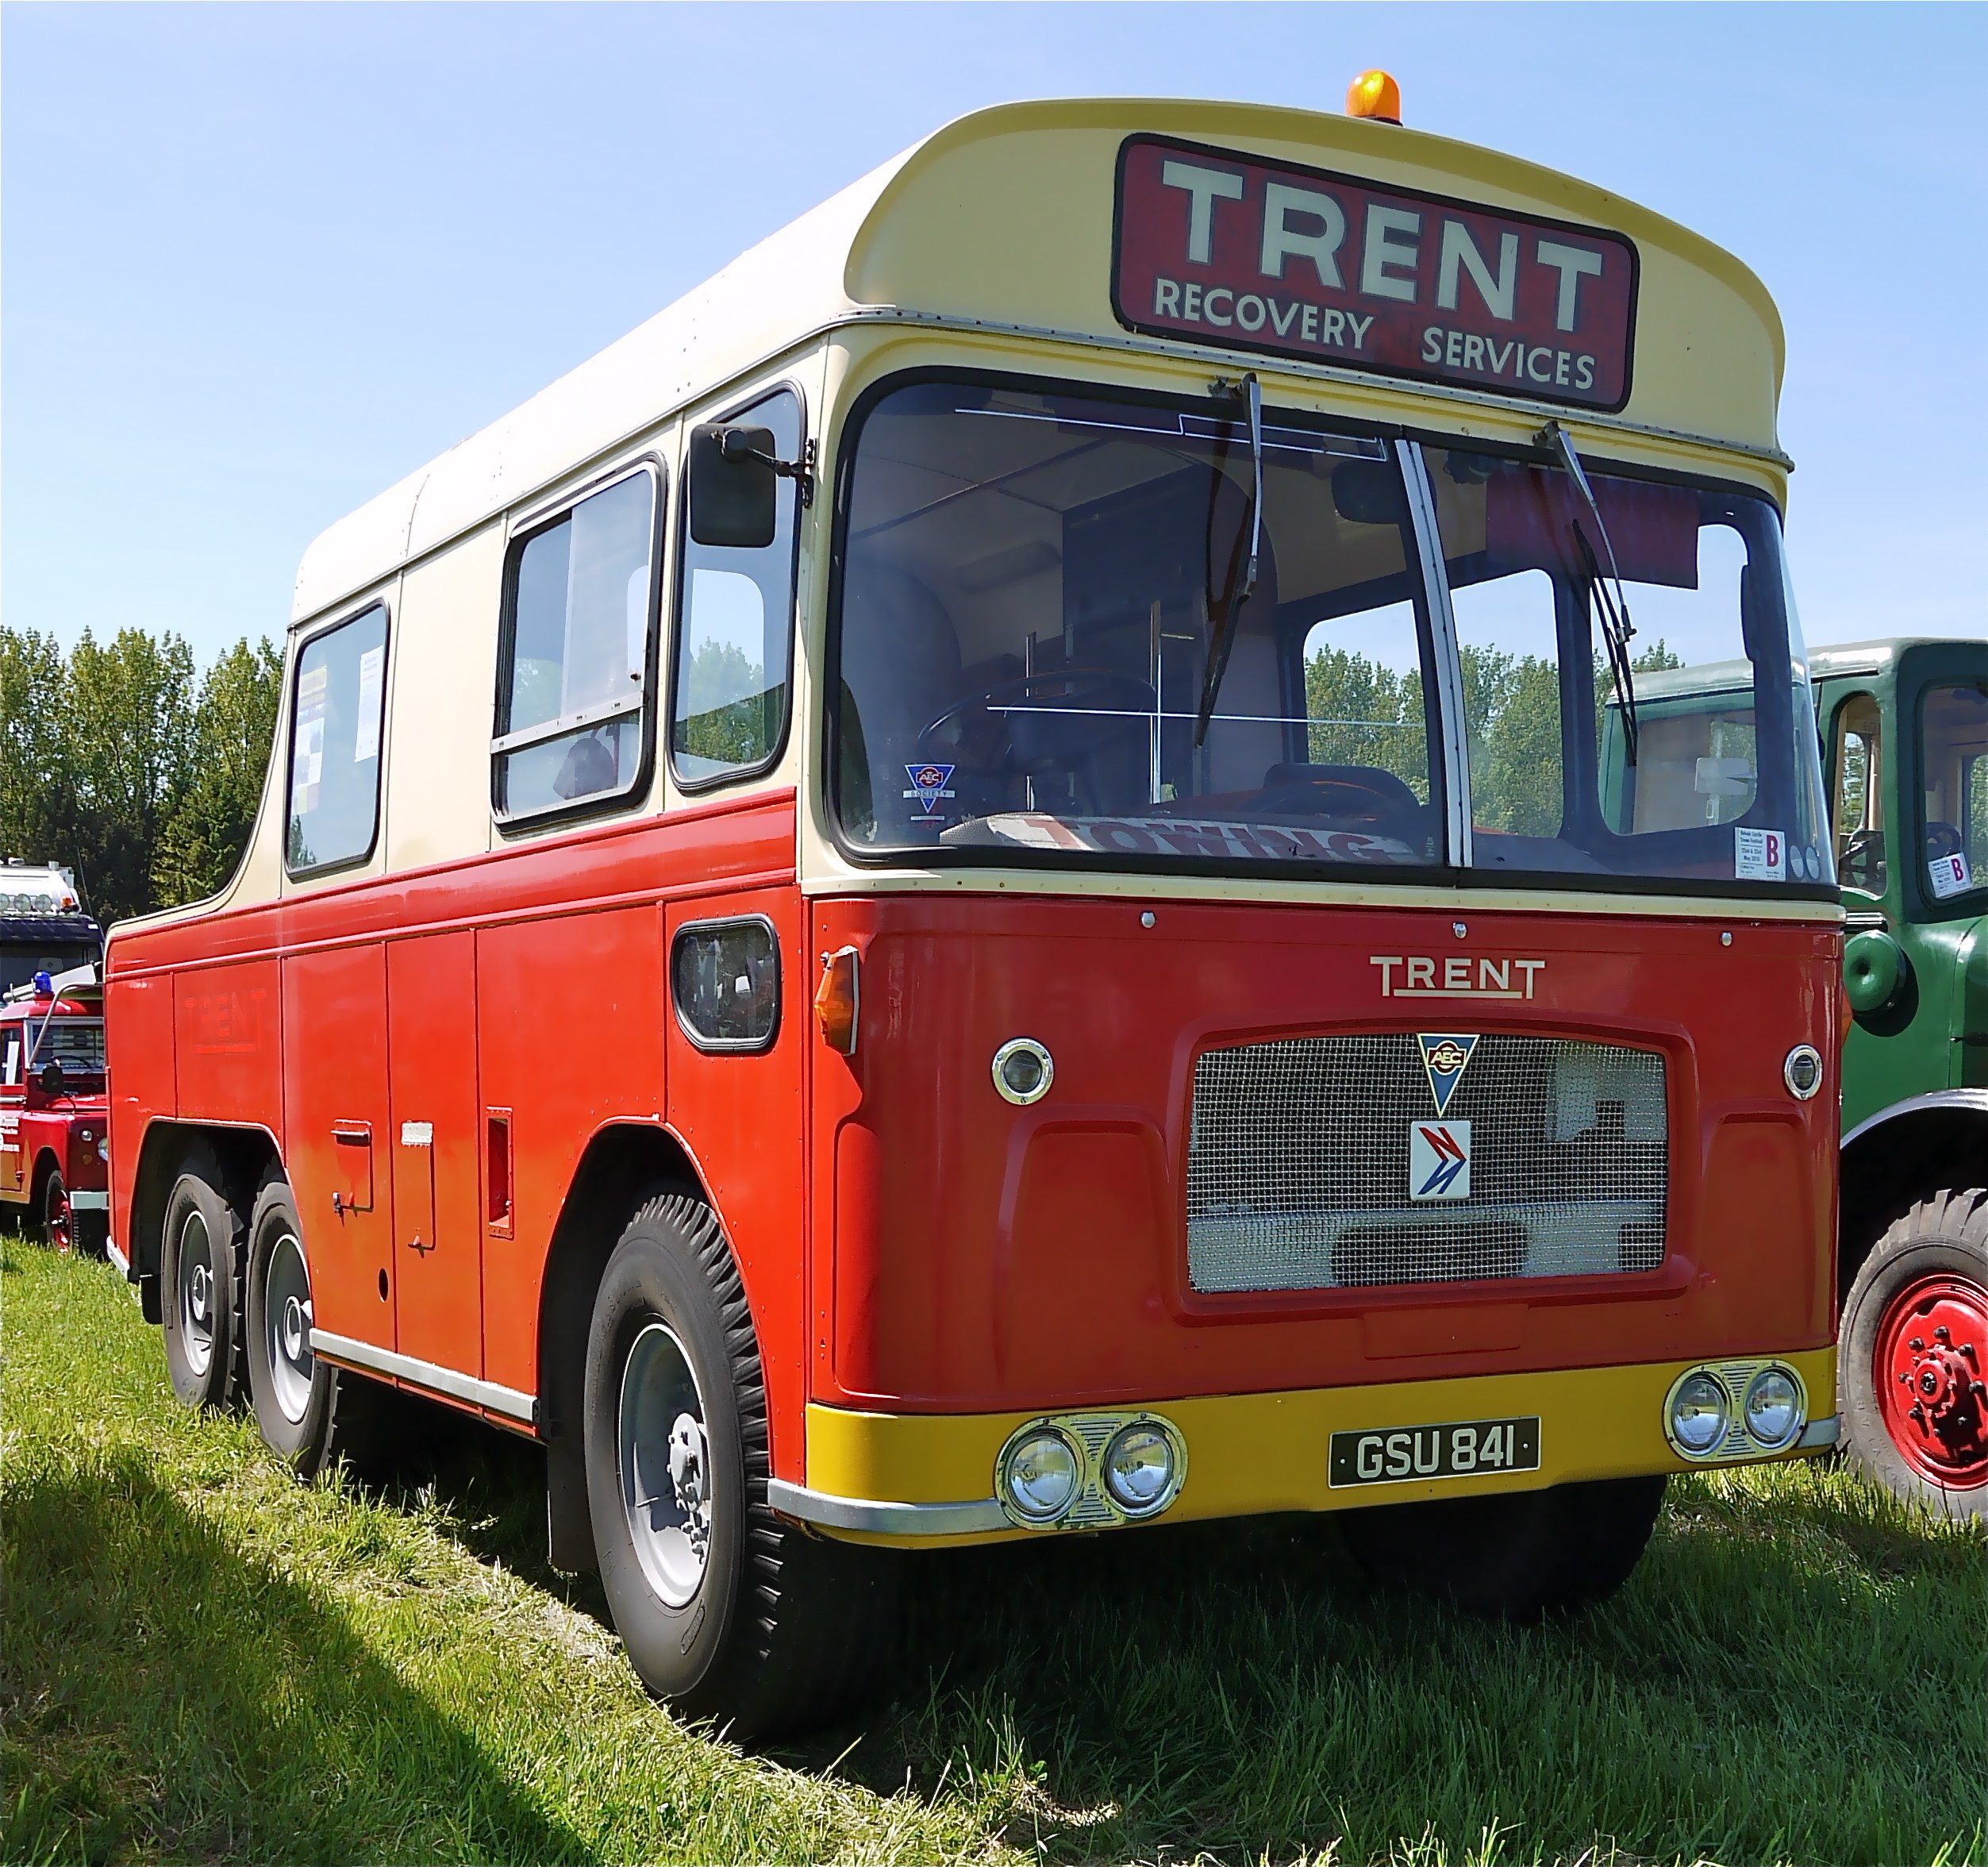 AEC Bus Breakdown Vehicle. Trent Recovery Services - Flickr - mick - Lumix